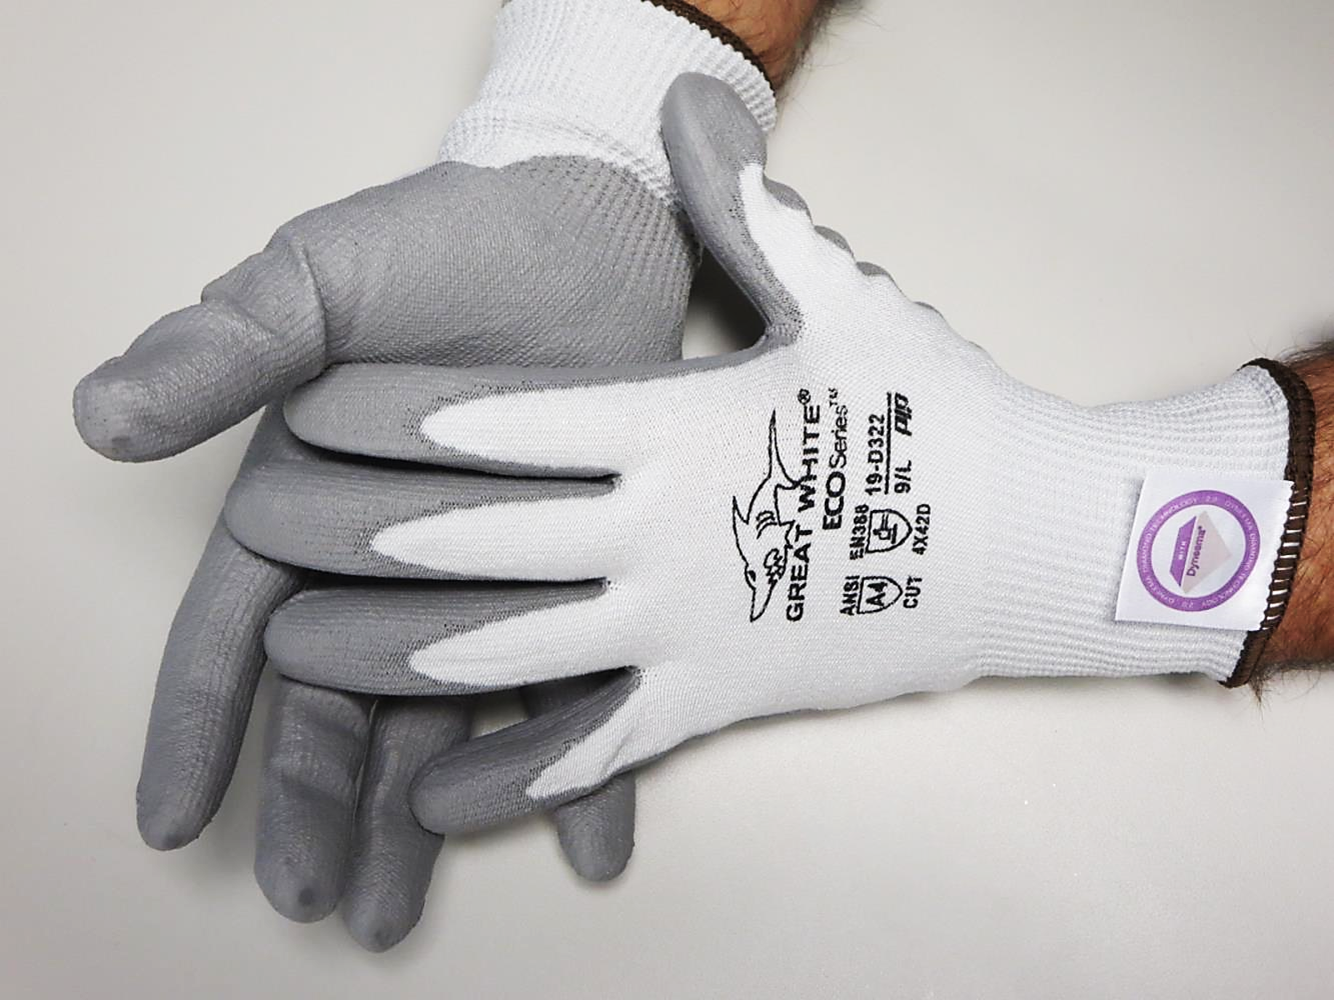 Great White® G-Tek ECOSeries 19-D322 PU Coated Dyneema® Diamond A4  Seamless Knit Cut-Resistant Work Gloves utilizes Bio-Based Fibers From P.E.T. Water Bottles